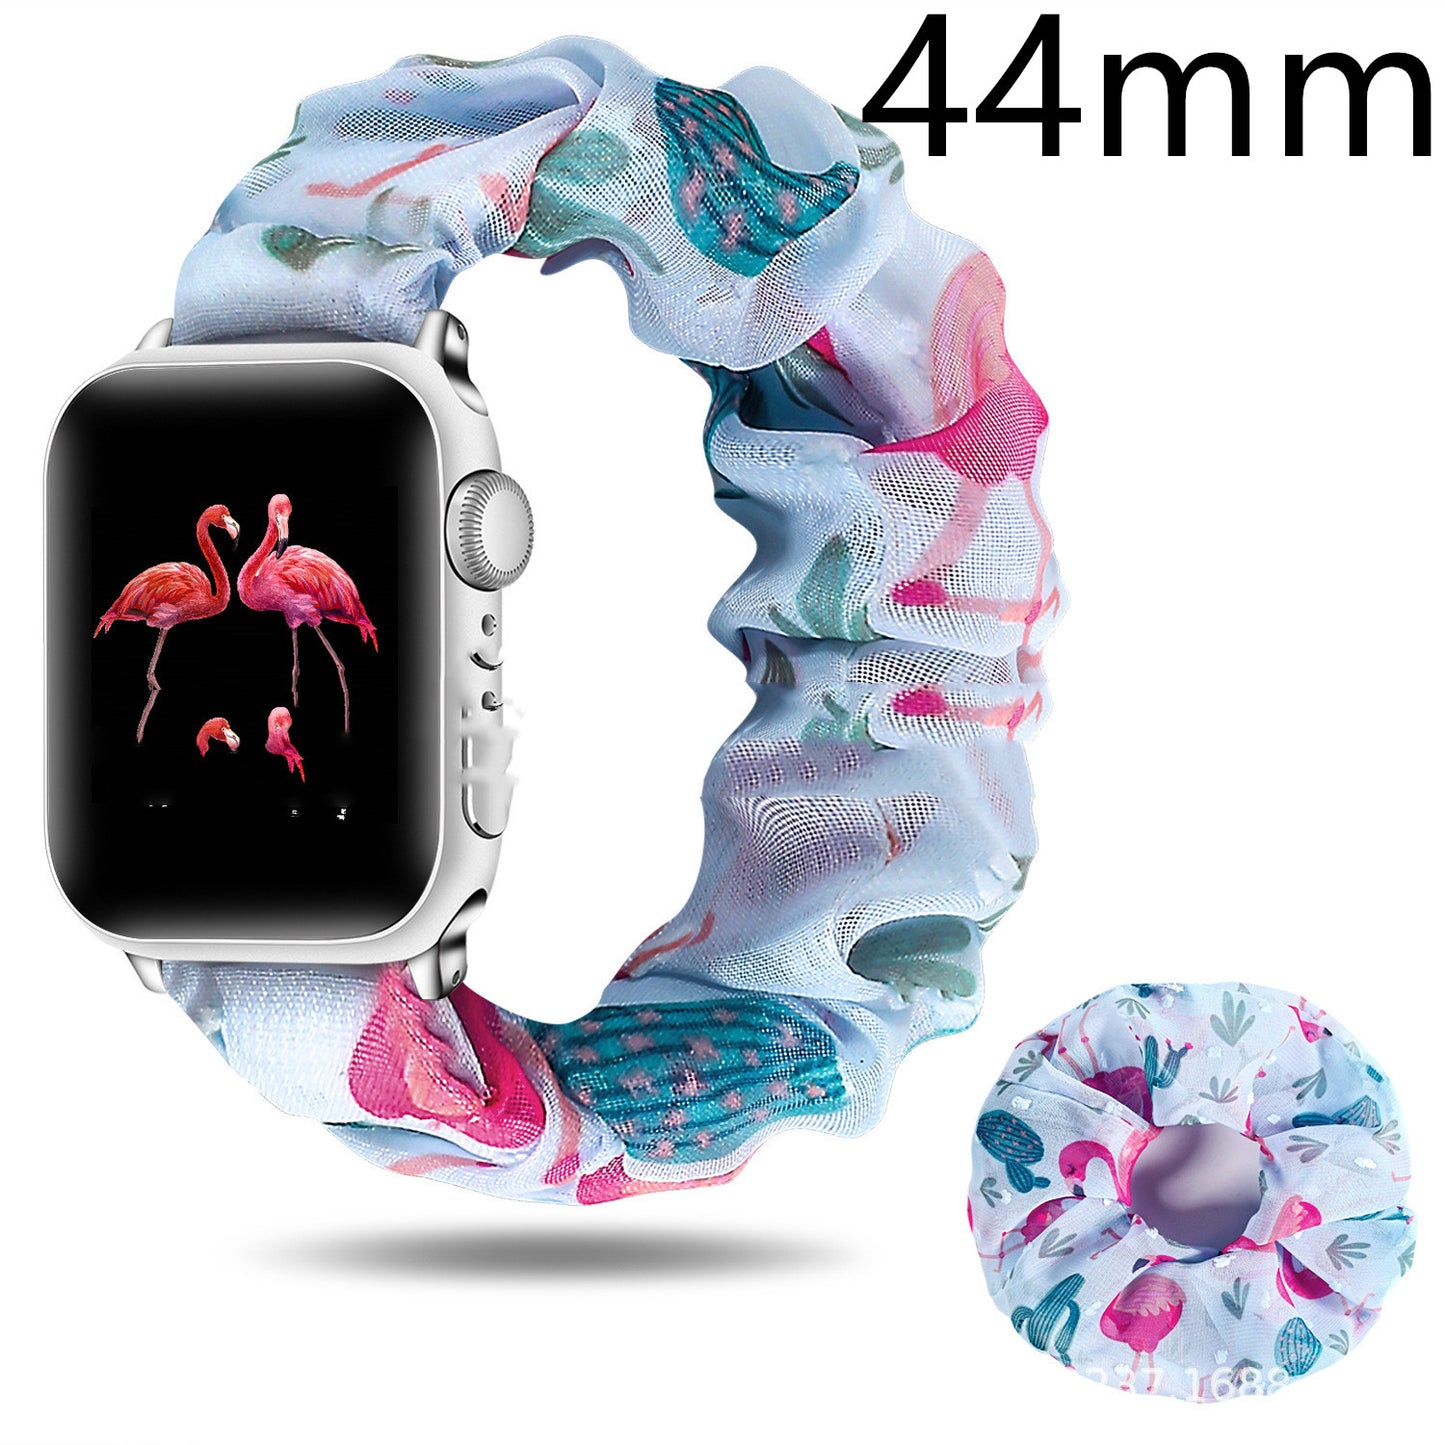 Calico Hair Tie and Apple Watch Band Set